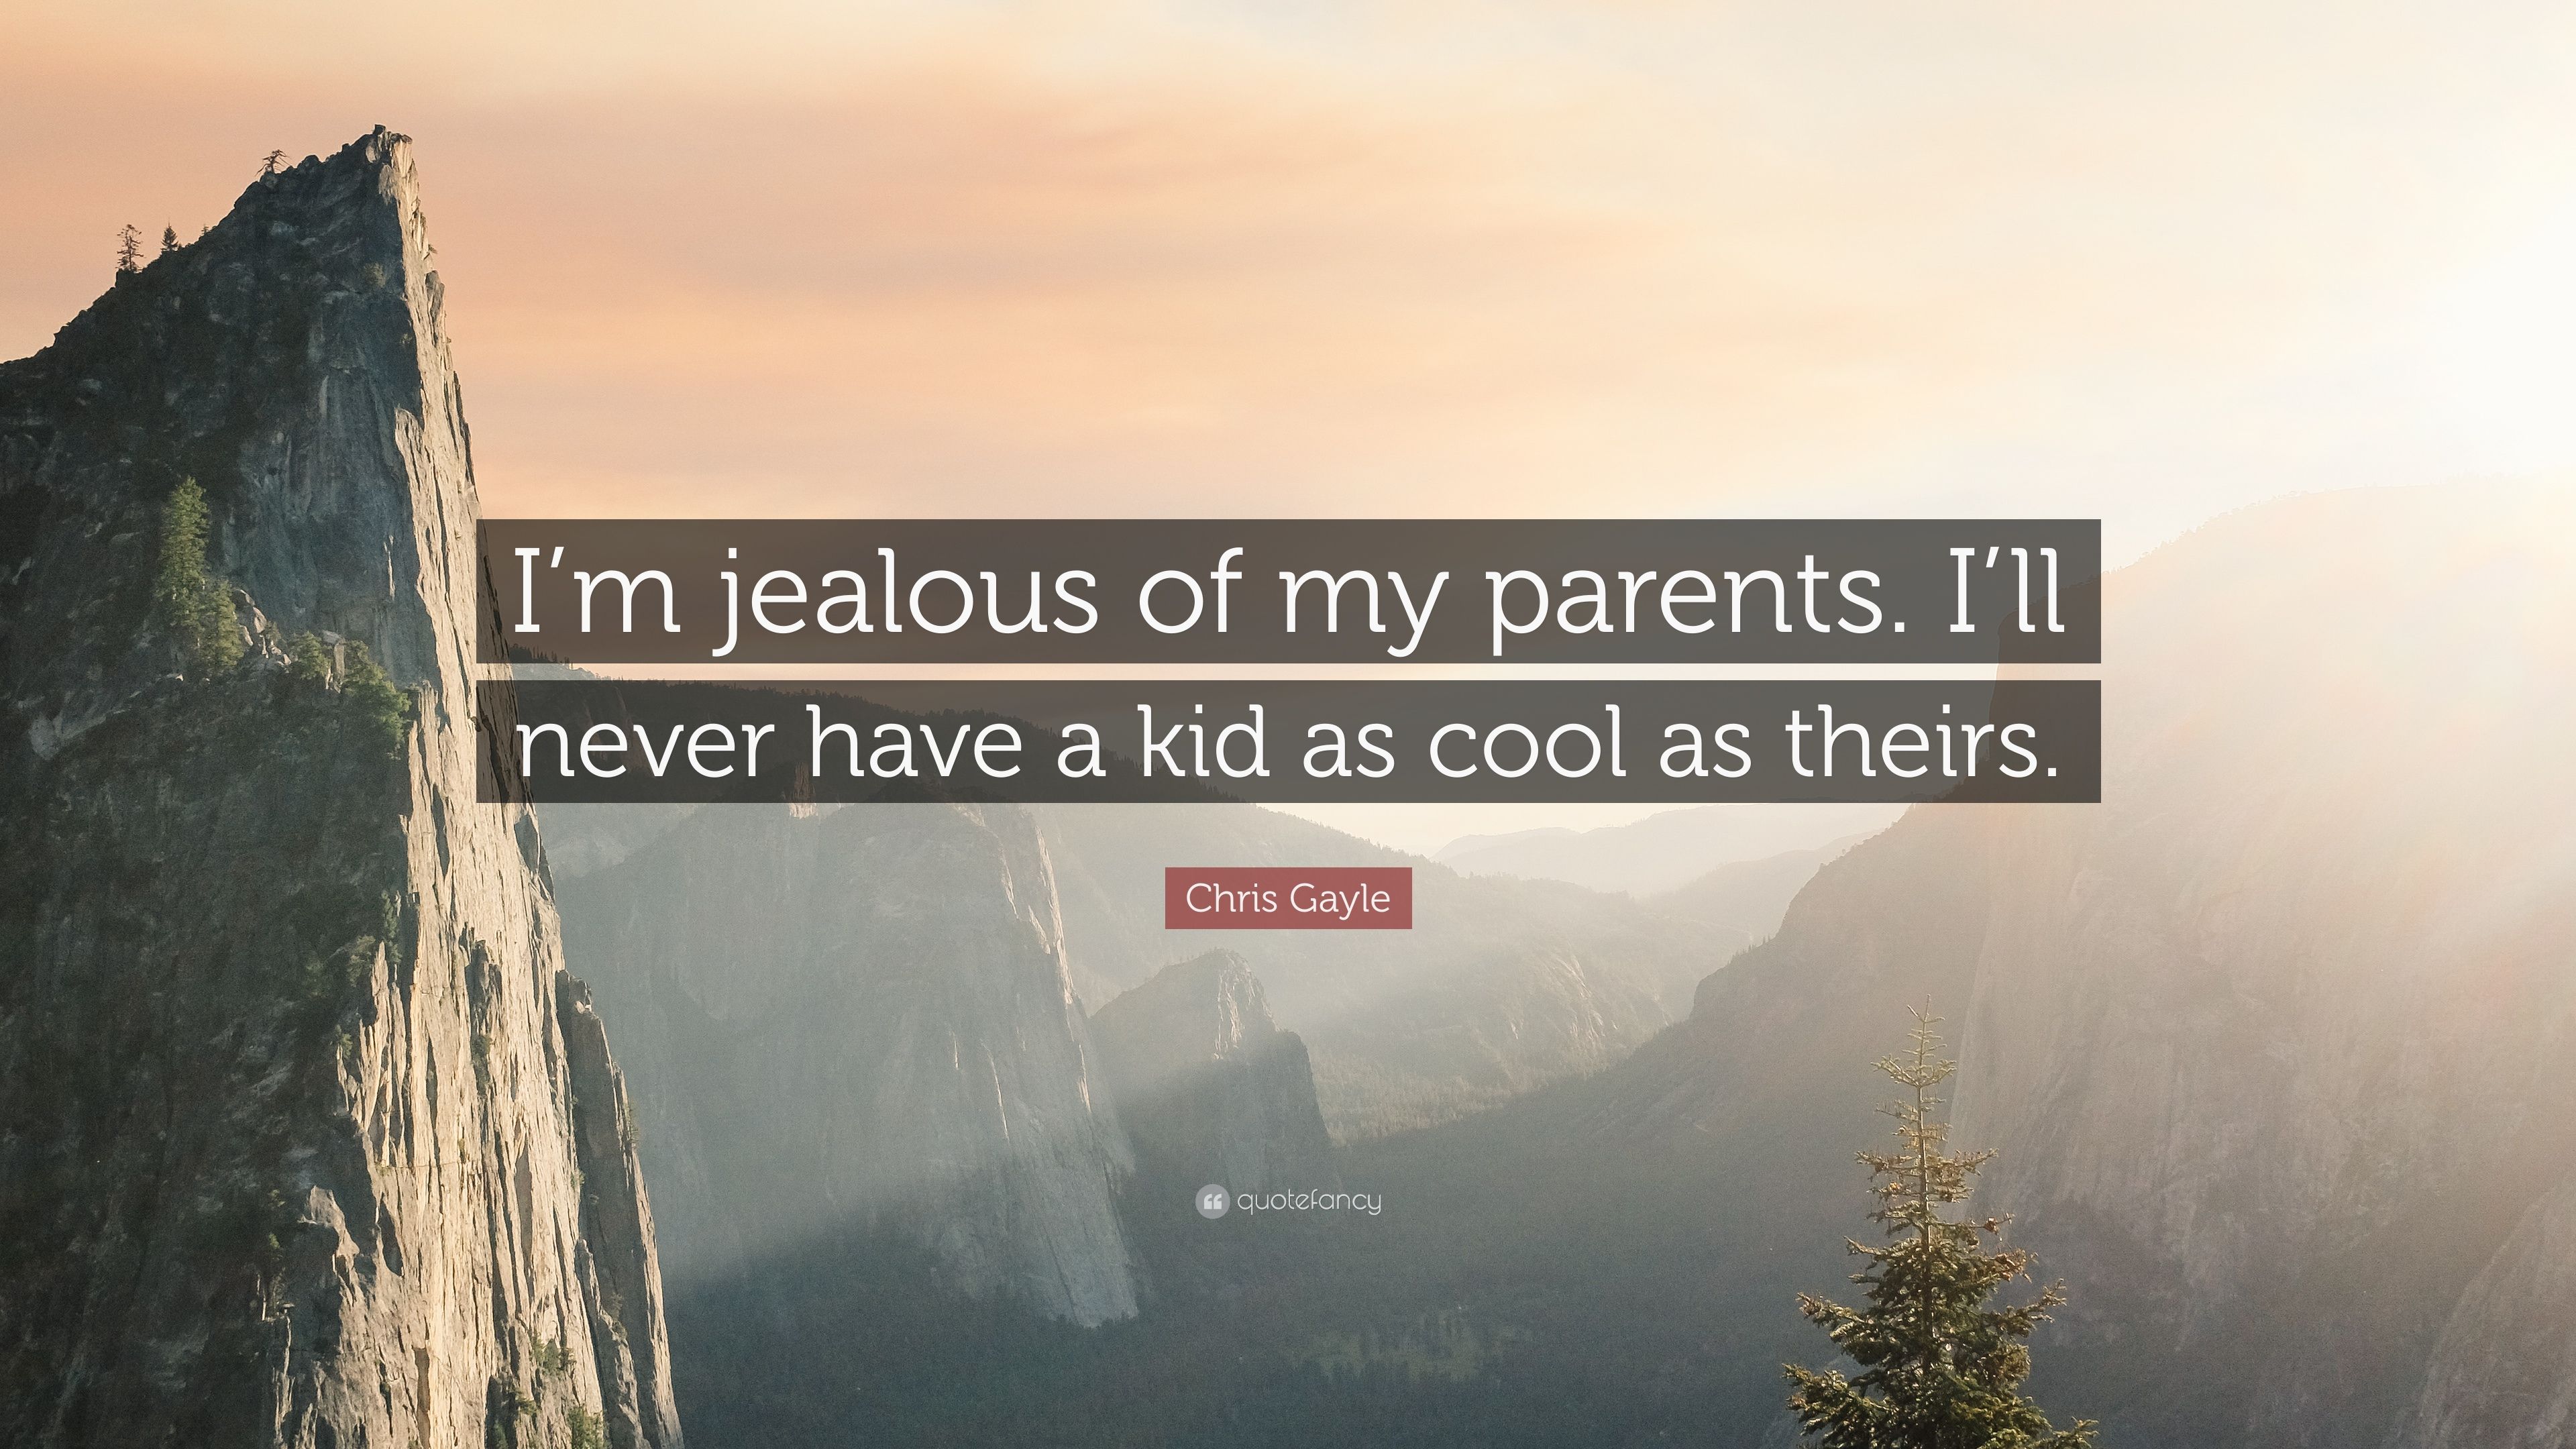 Chris Gayle Quote: “I'm jealous of my parents. I'll never have a